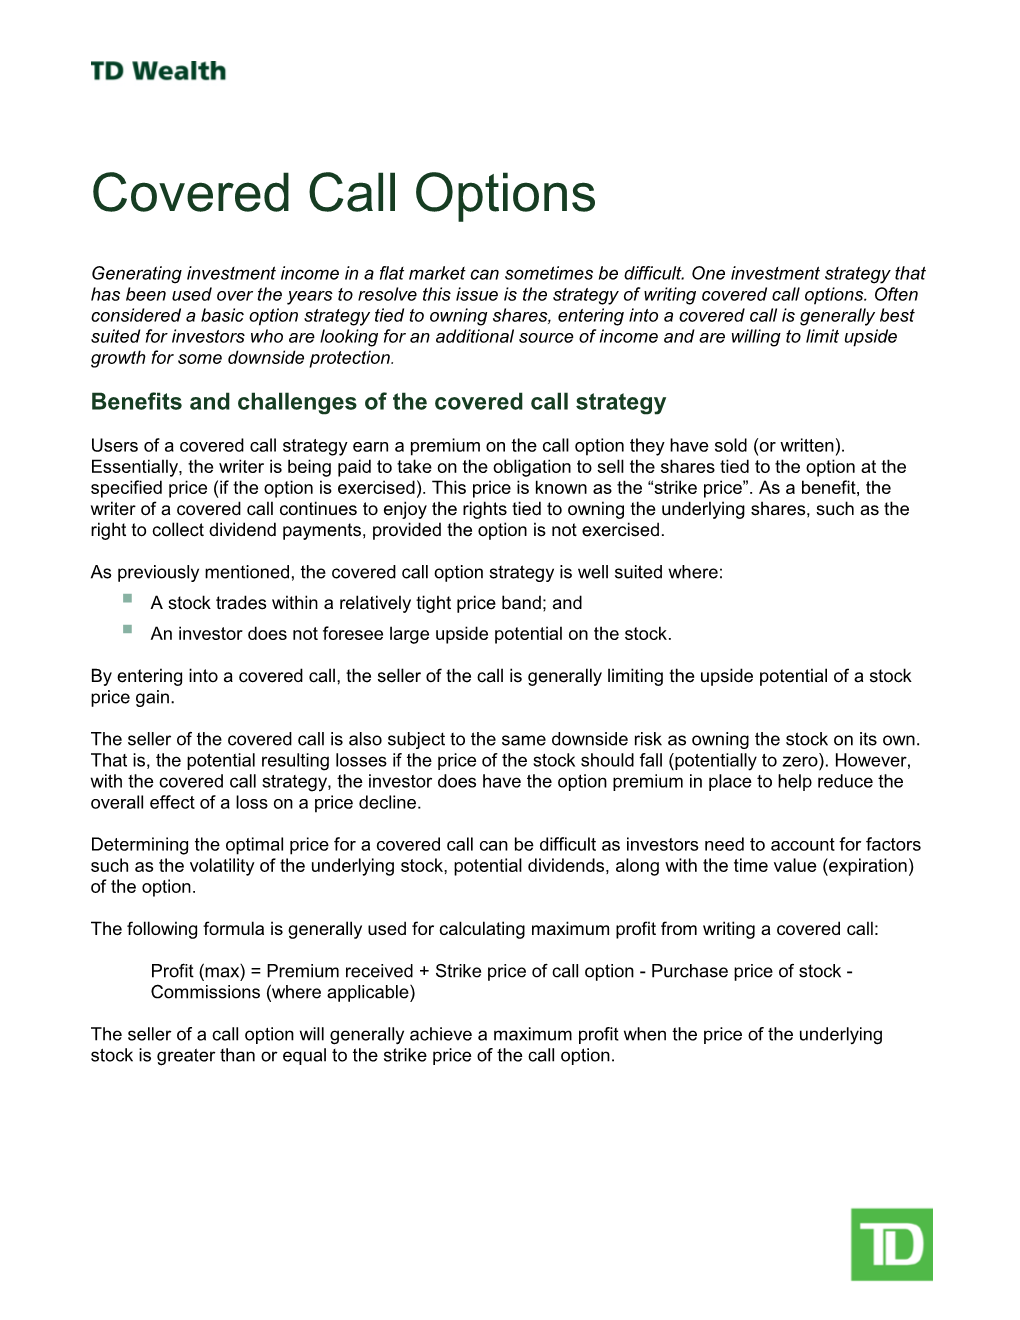 Covered Call Options